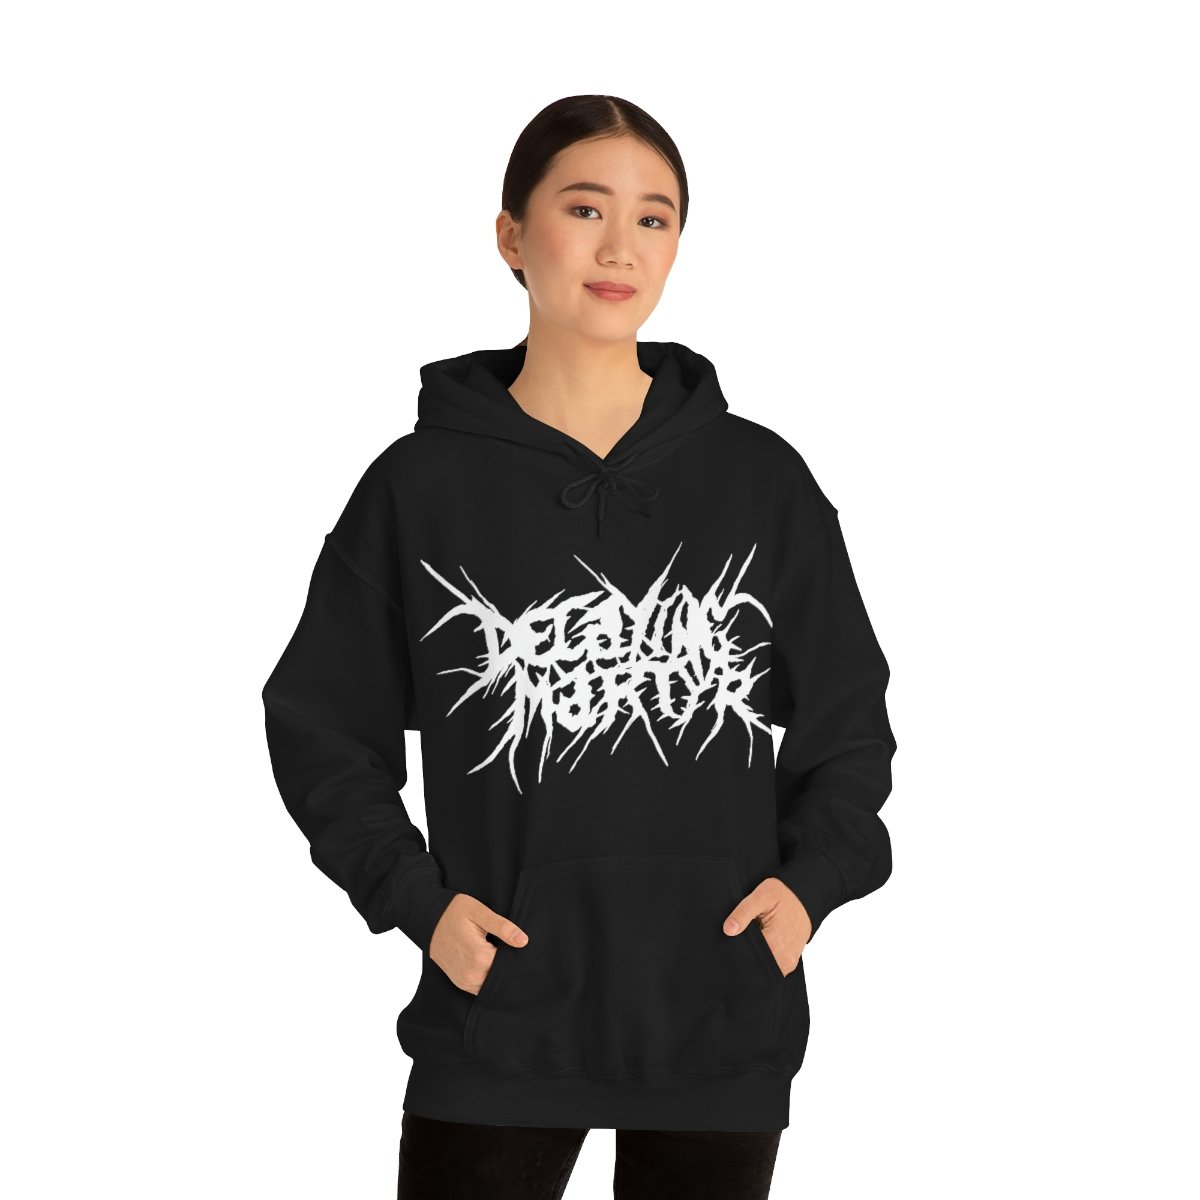 Decaying Martyr Logo (White) Pullover Hooded Sweatshirt